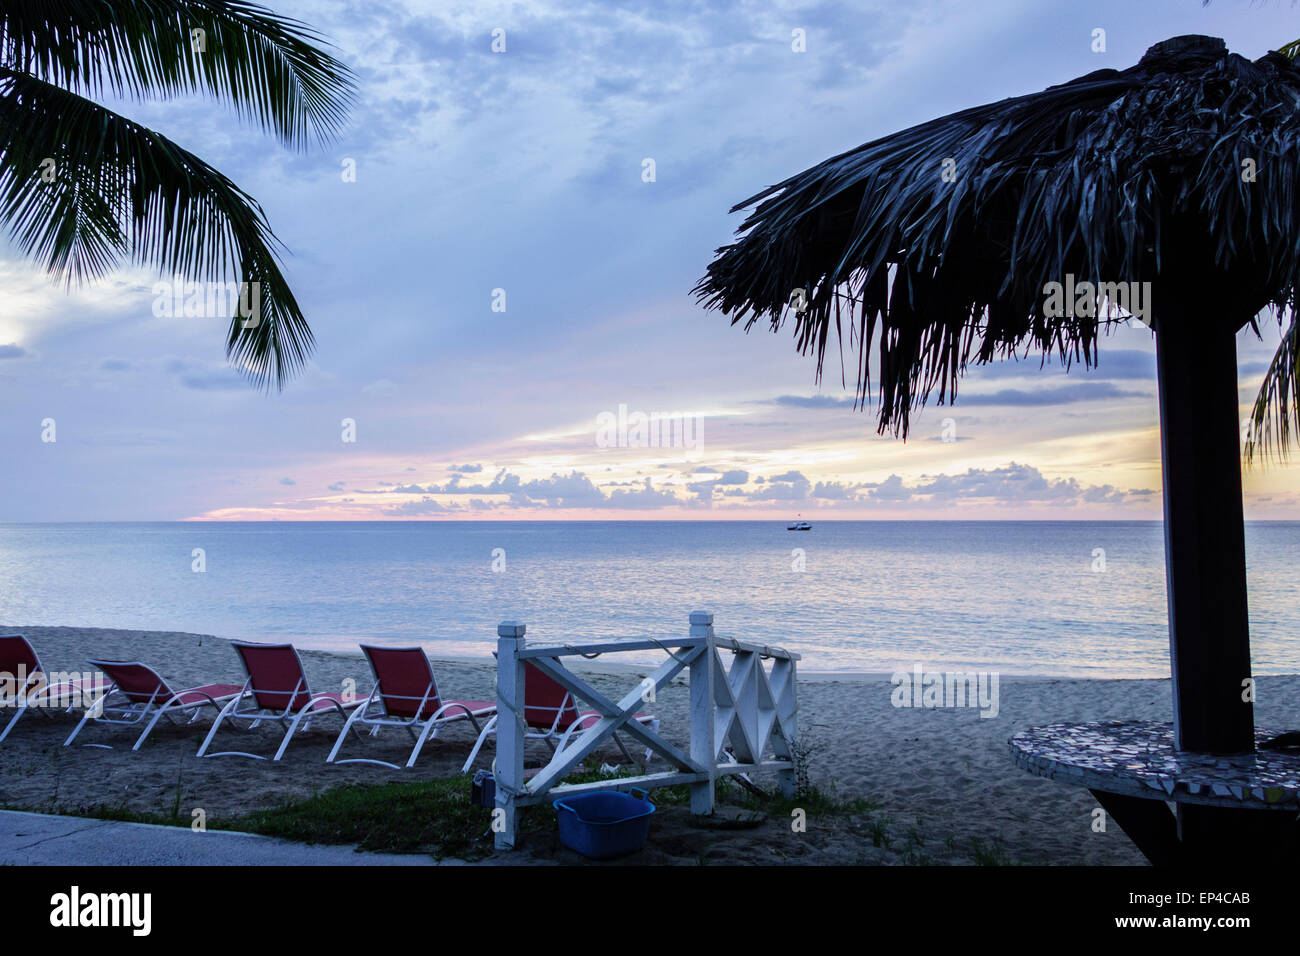 The view from Cottages By the Sea resort on the west end of St. Croix, U.S. Virgin Islands at sundown. Stock Photo